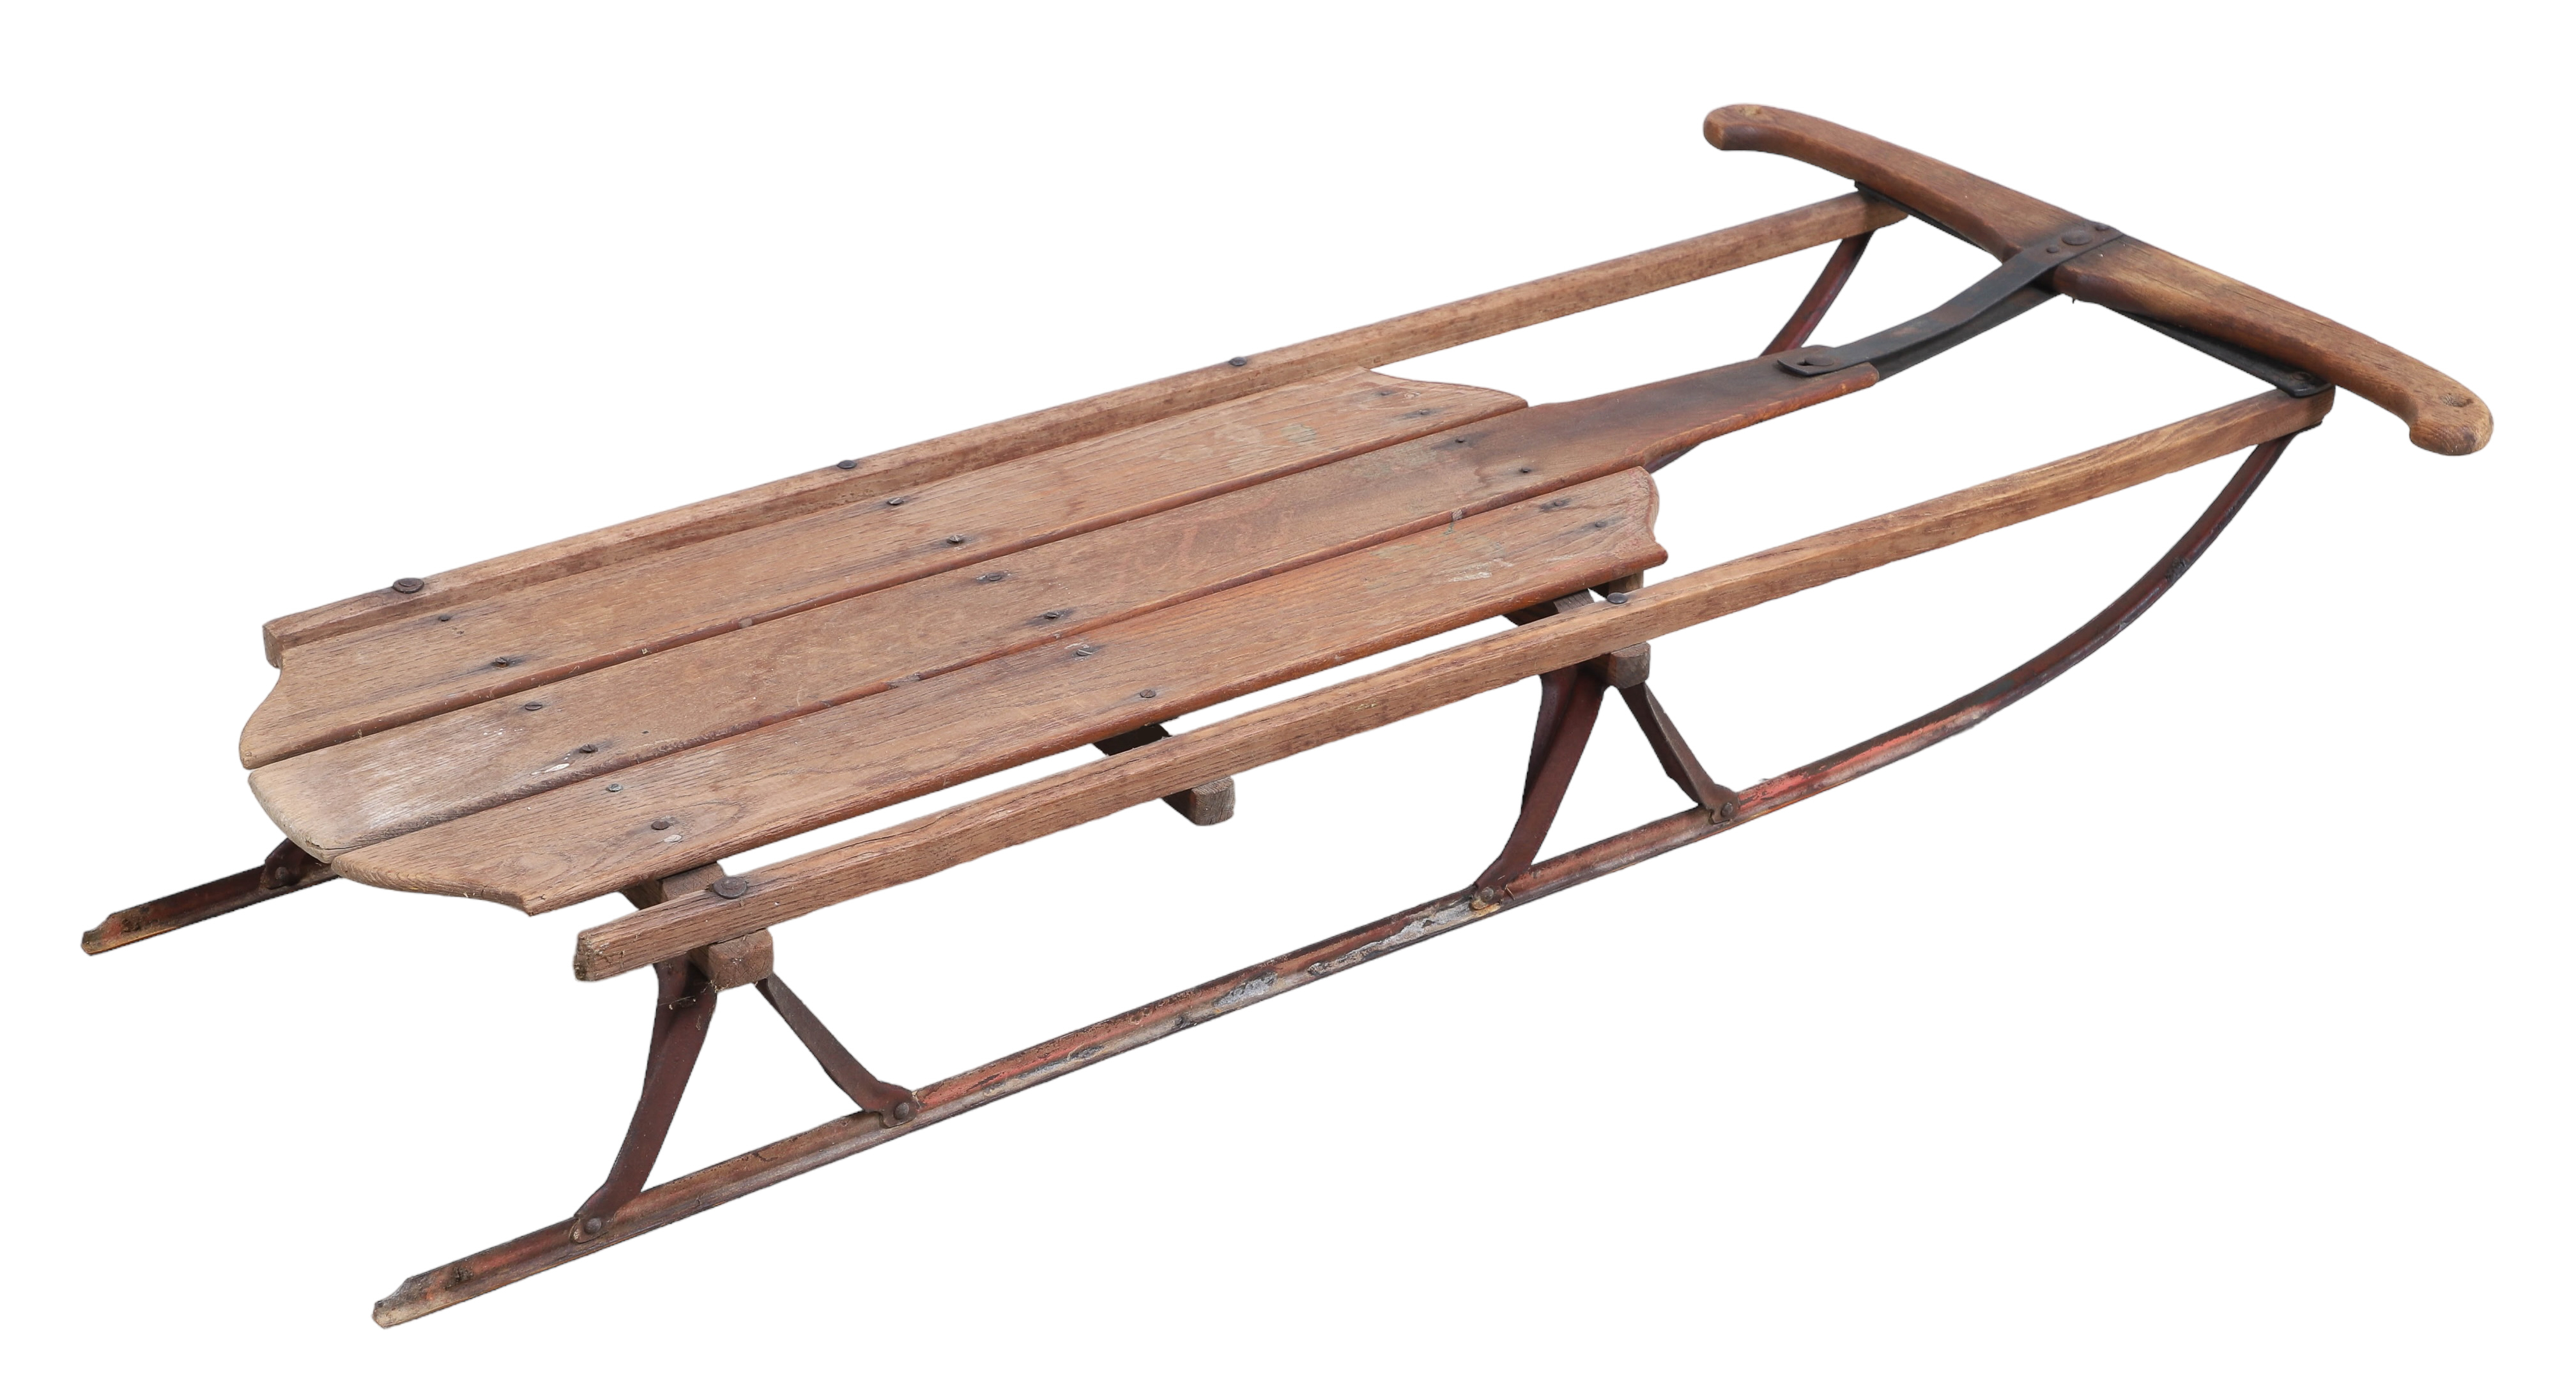 Vintage wooden sled, wrought iron runners,